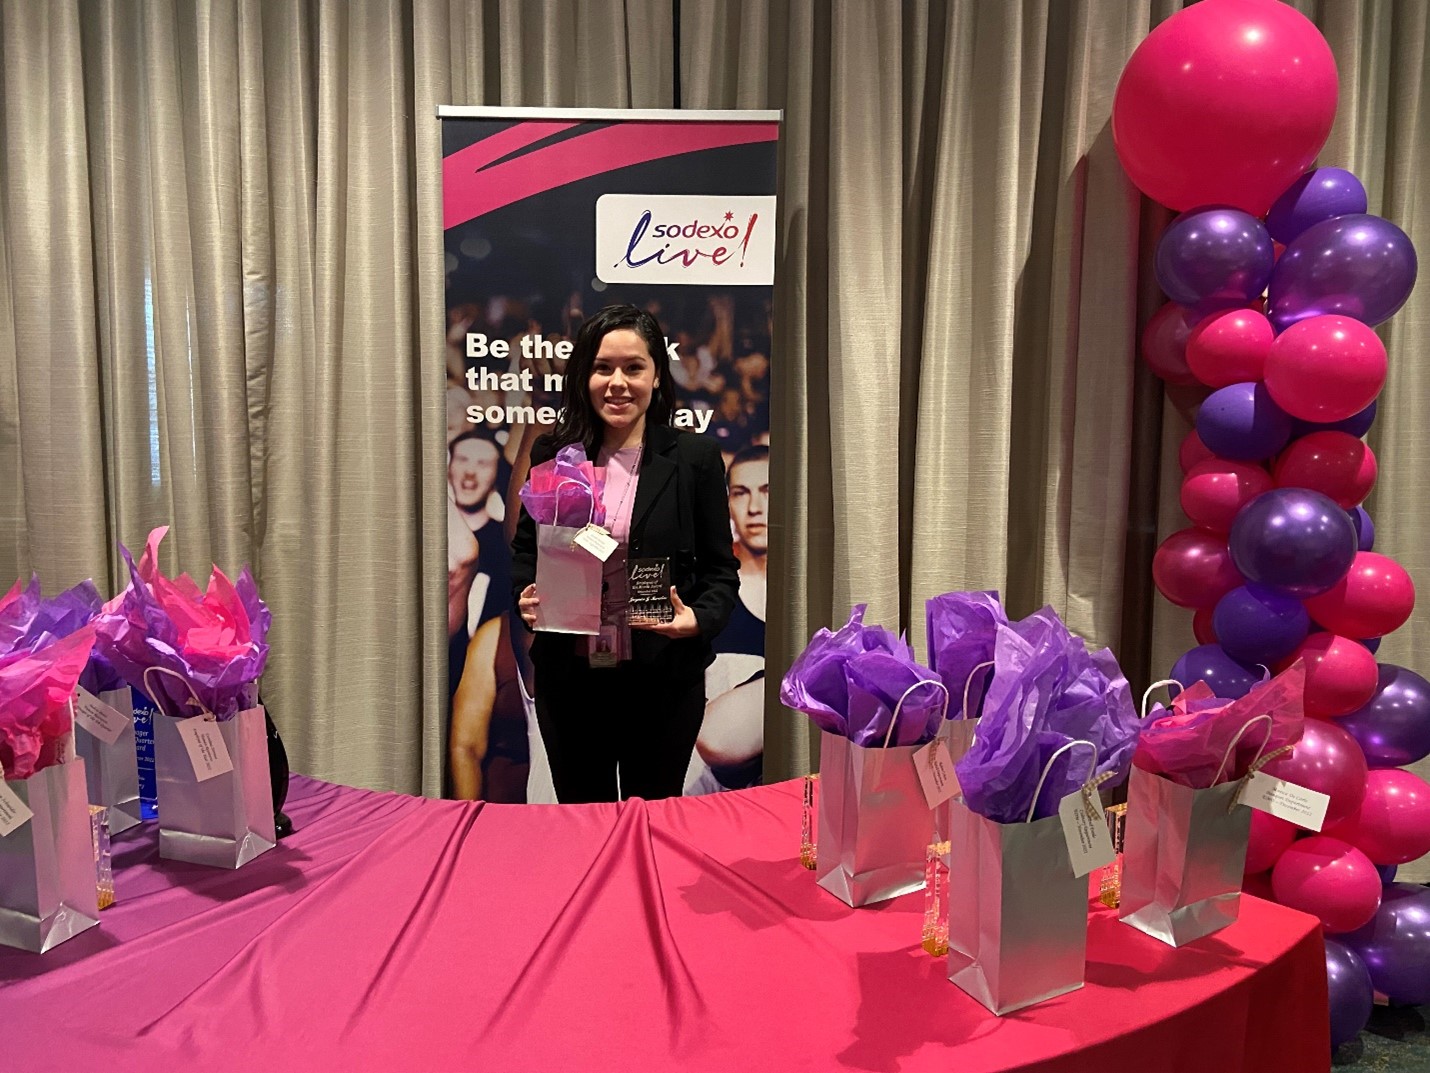 Sodexo live event young woman receiving gif pink balloons